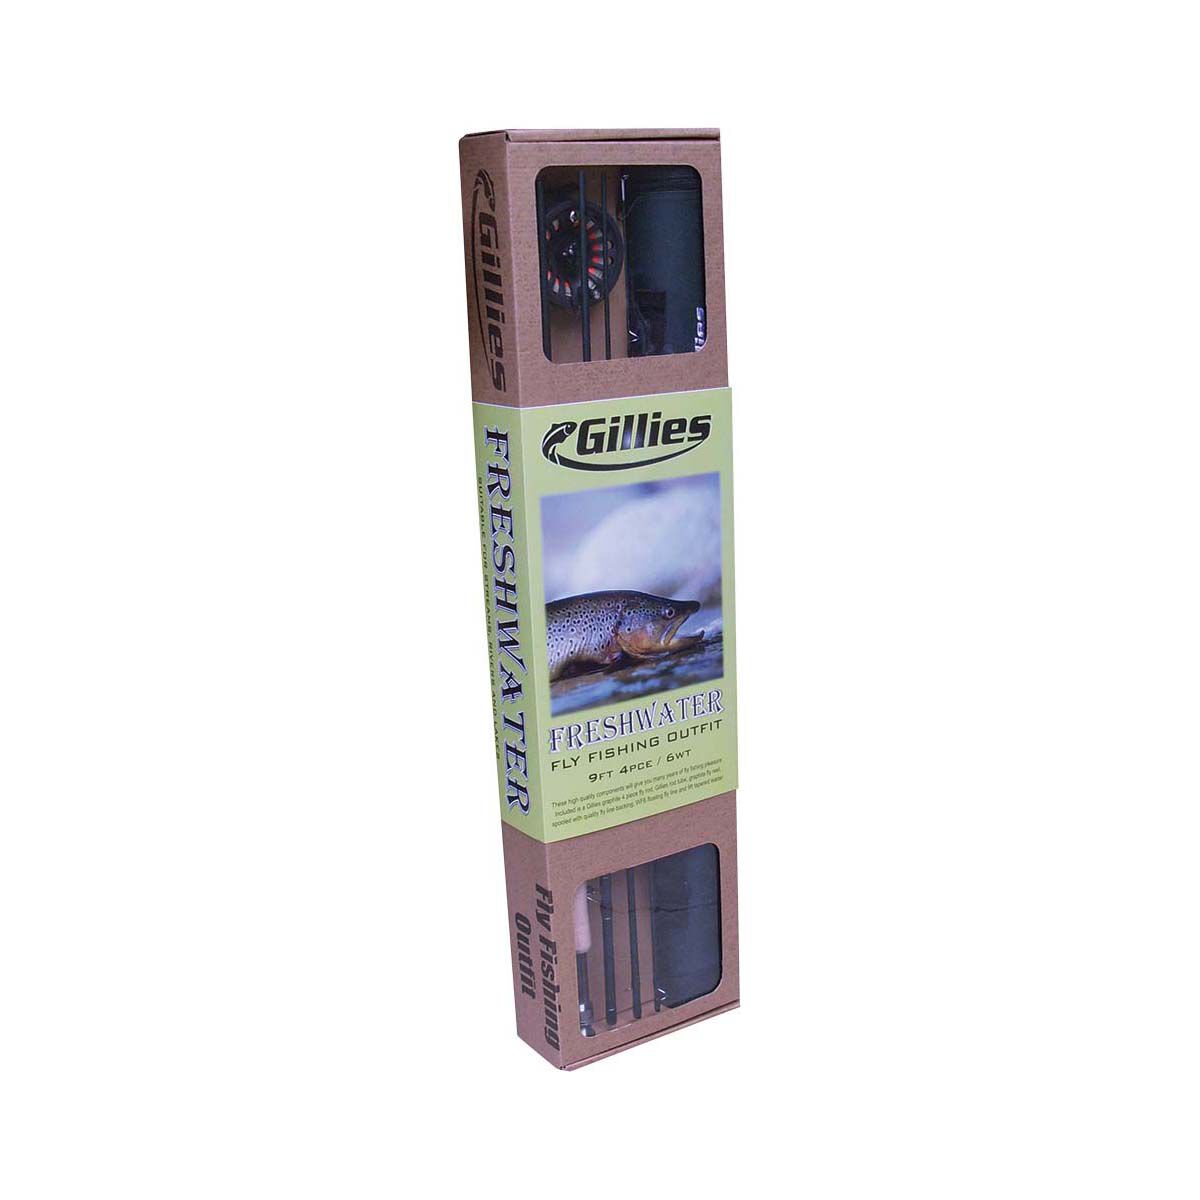 Gillies Freshwater Fly Fishing Combo 9ft 6wt